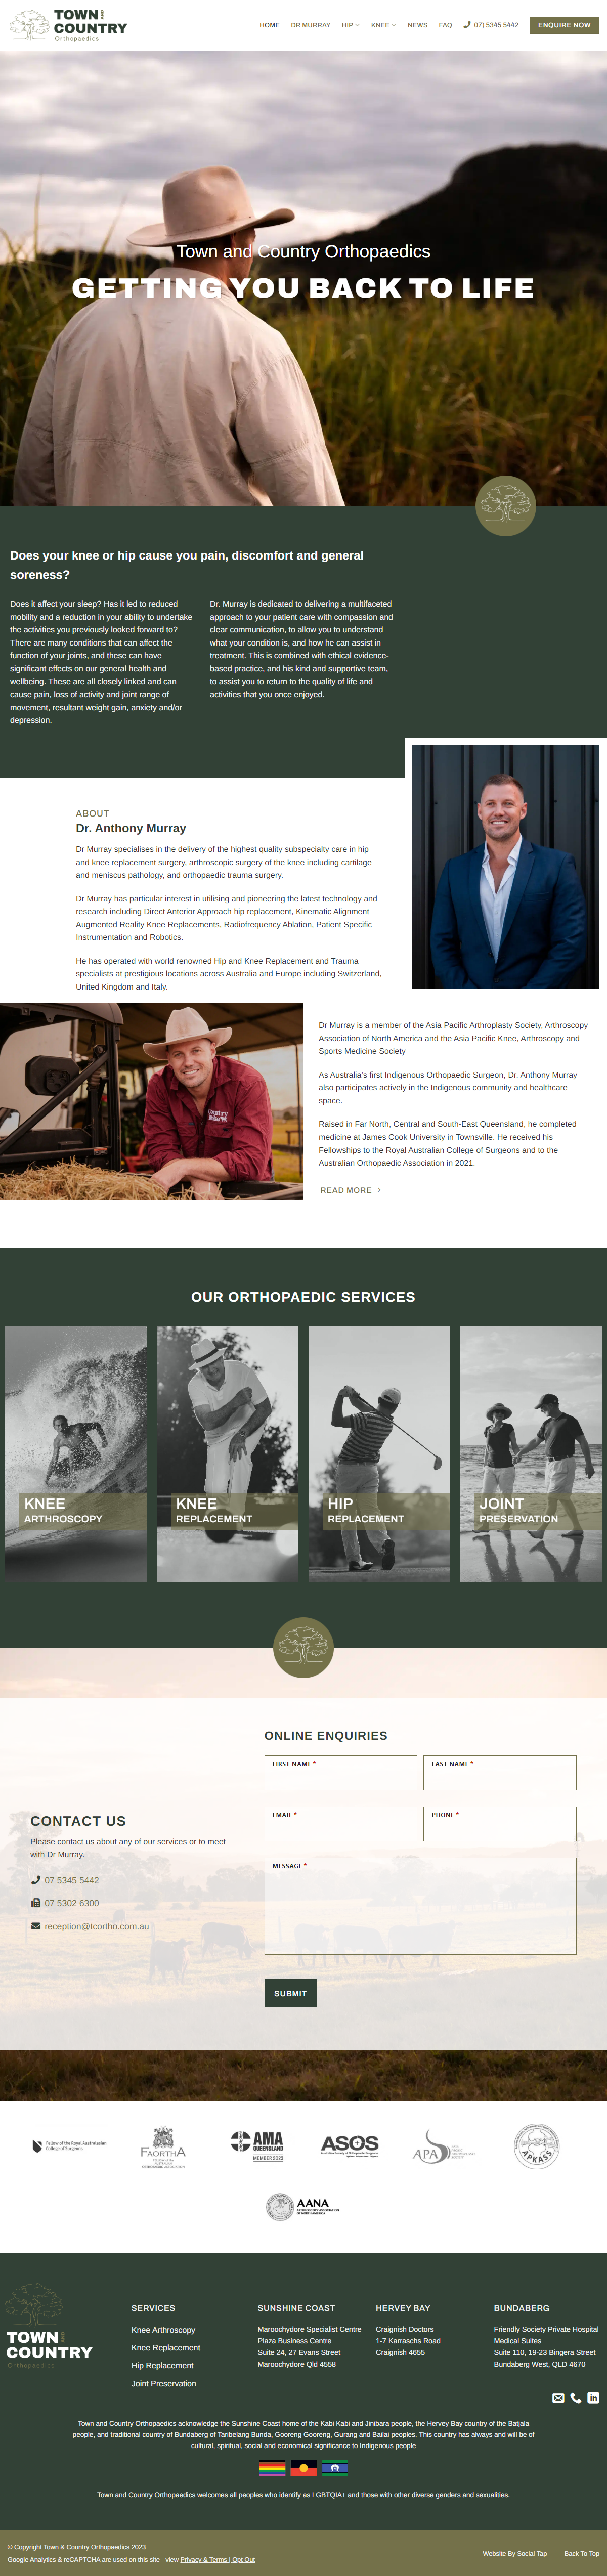 Hospitality Tourism Website Design Town and Country Orthopaedics